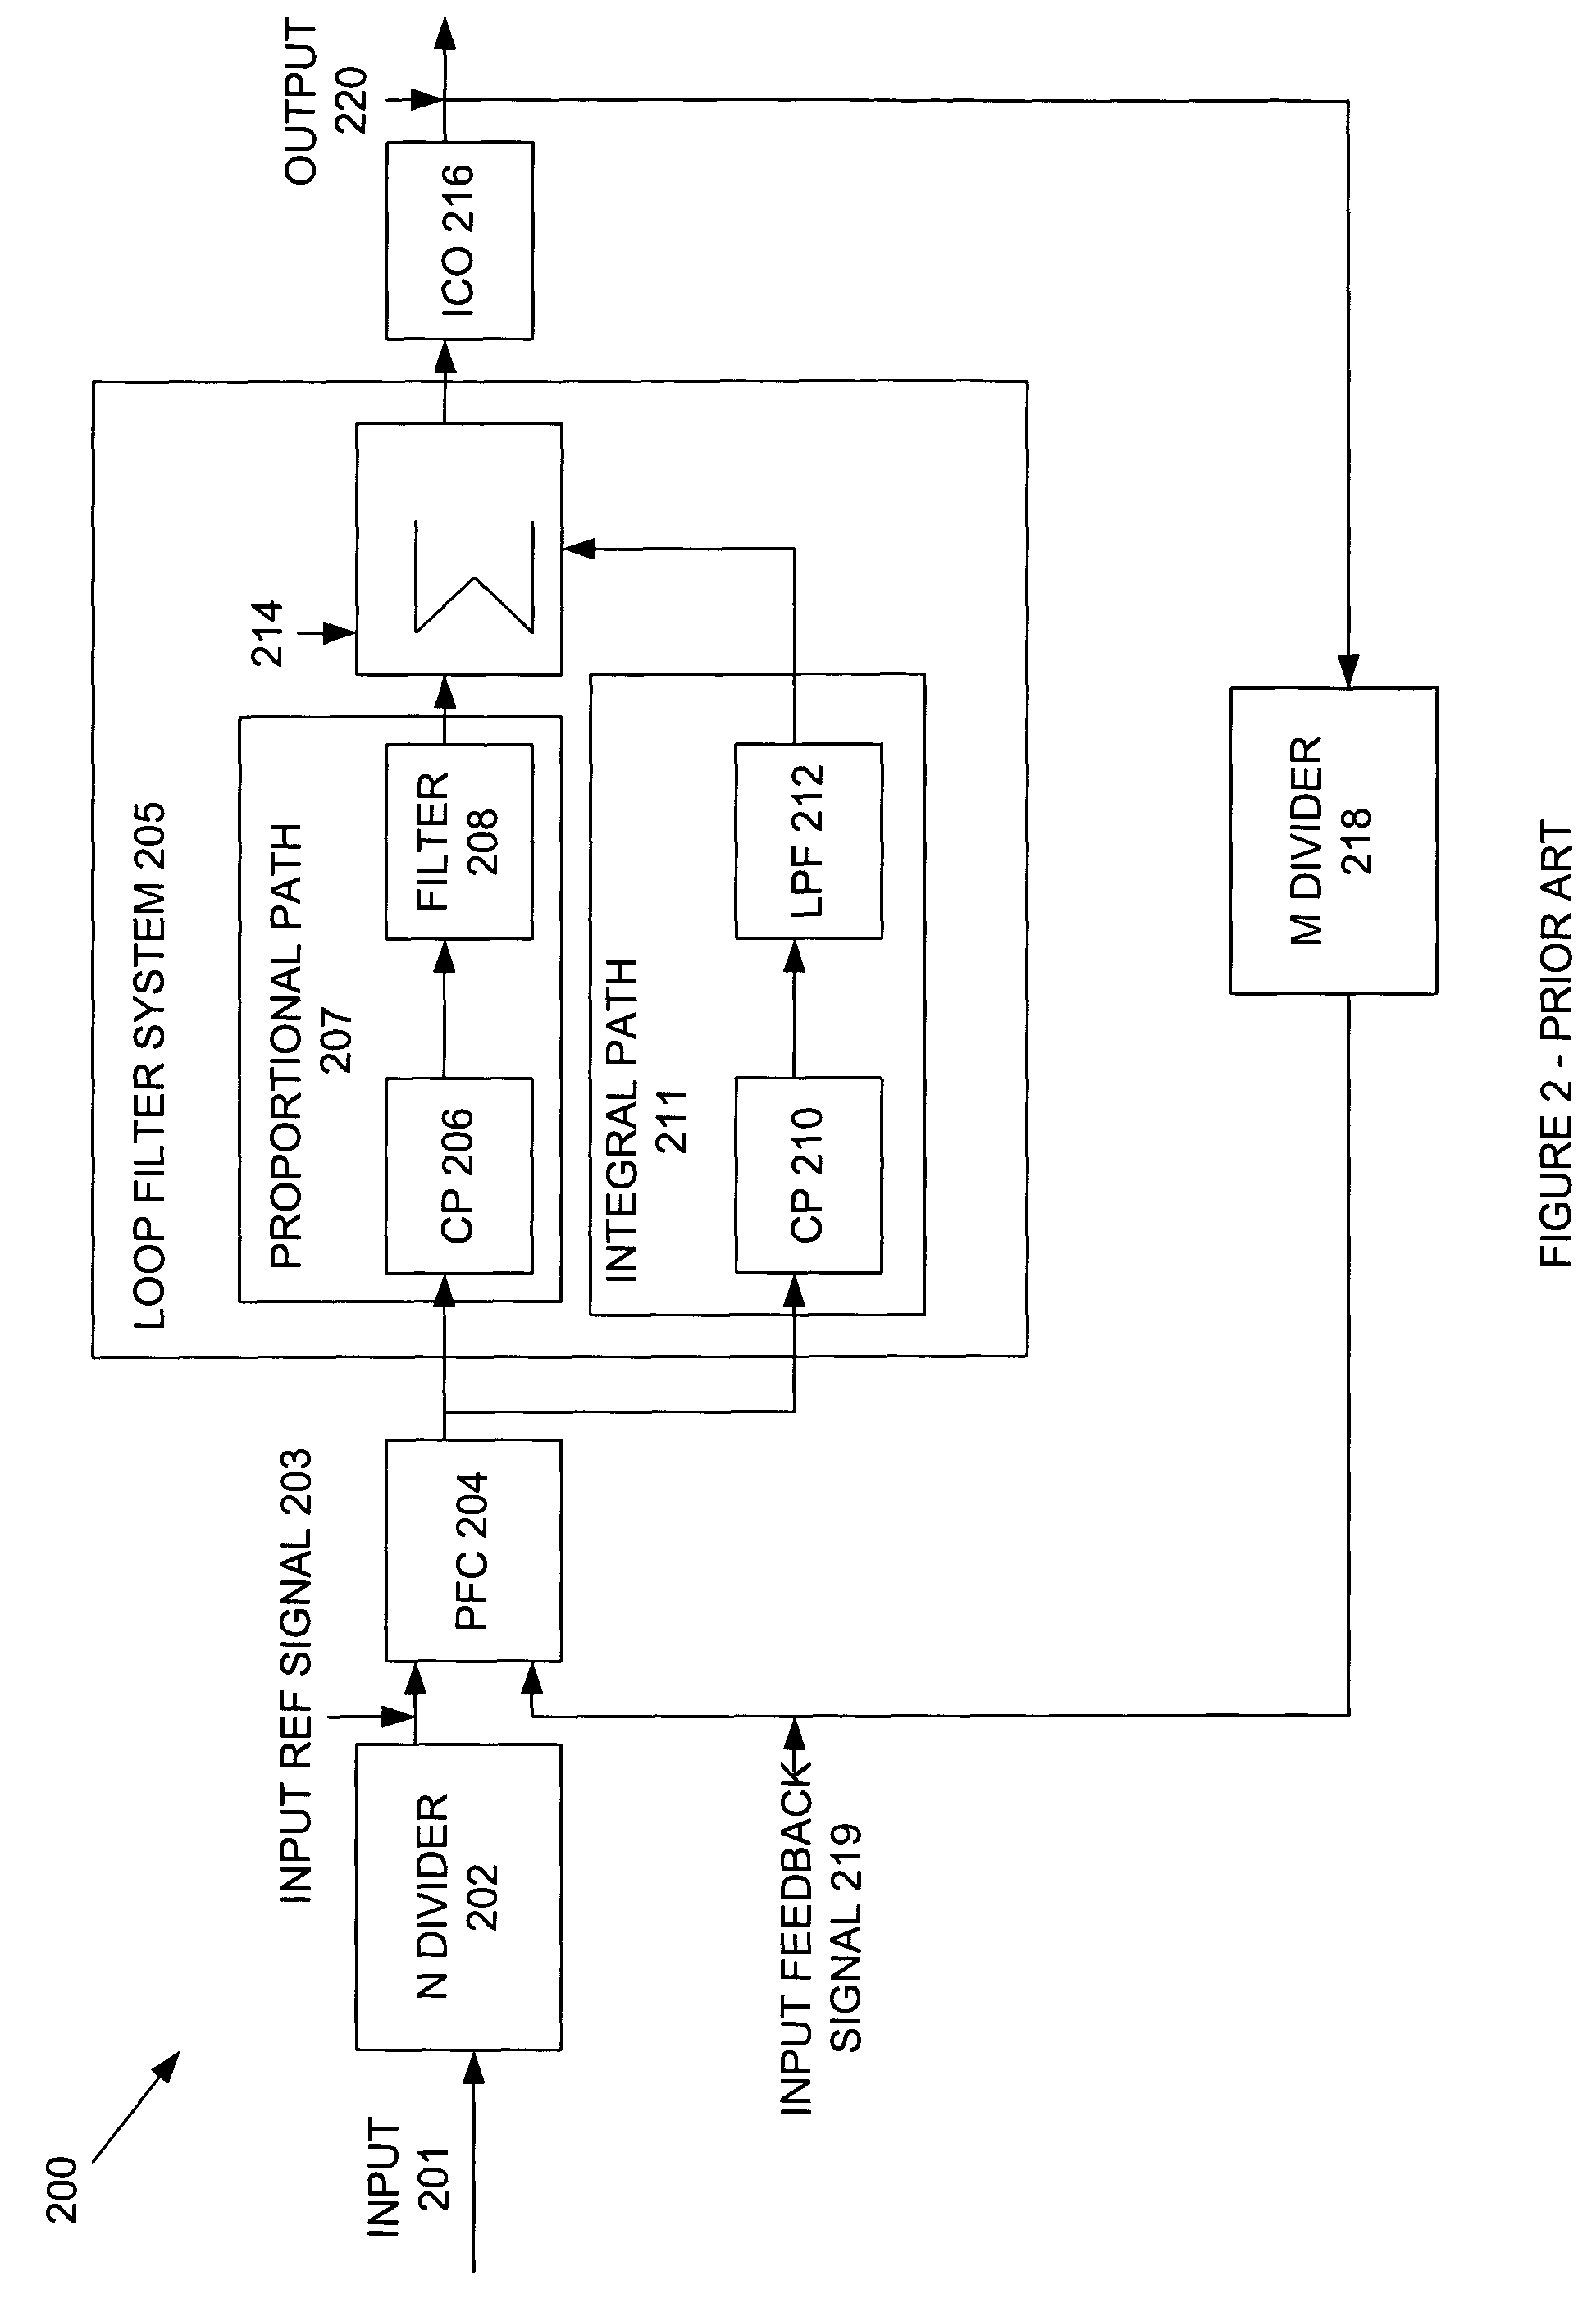 Low-noise loop filter for a phase-locked loop system